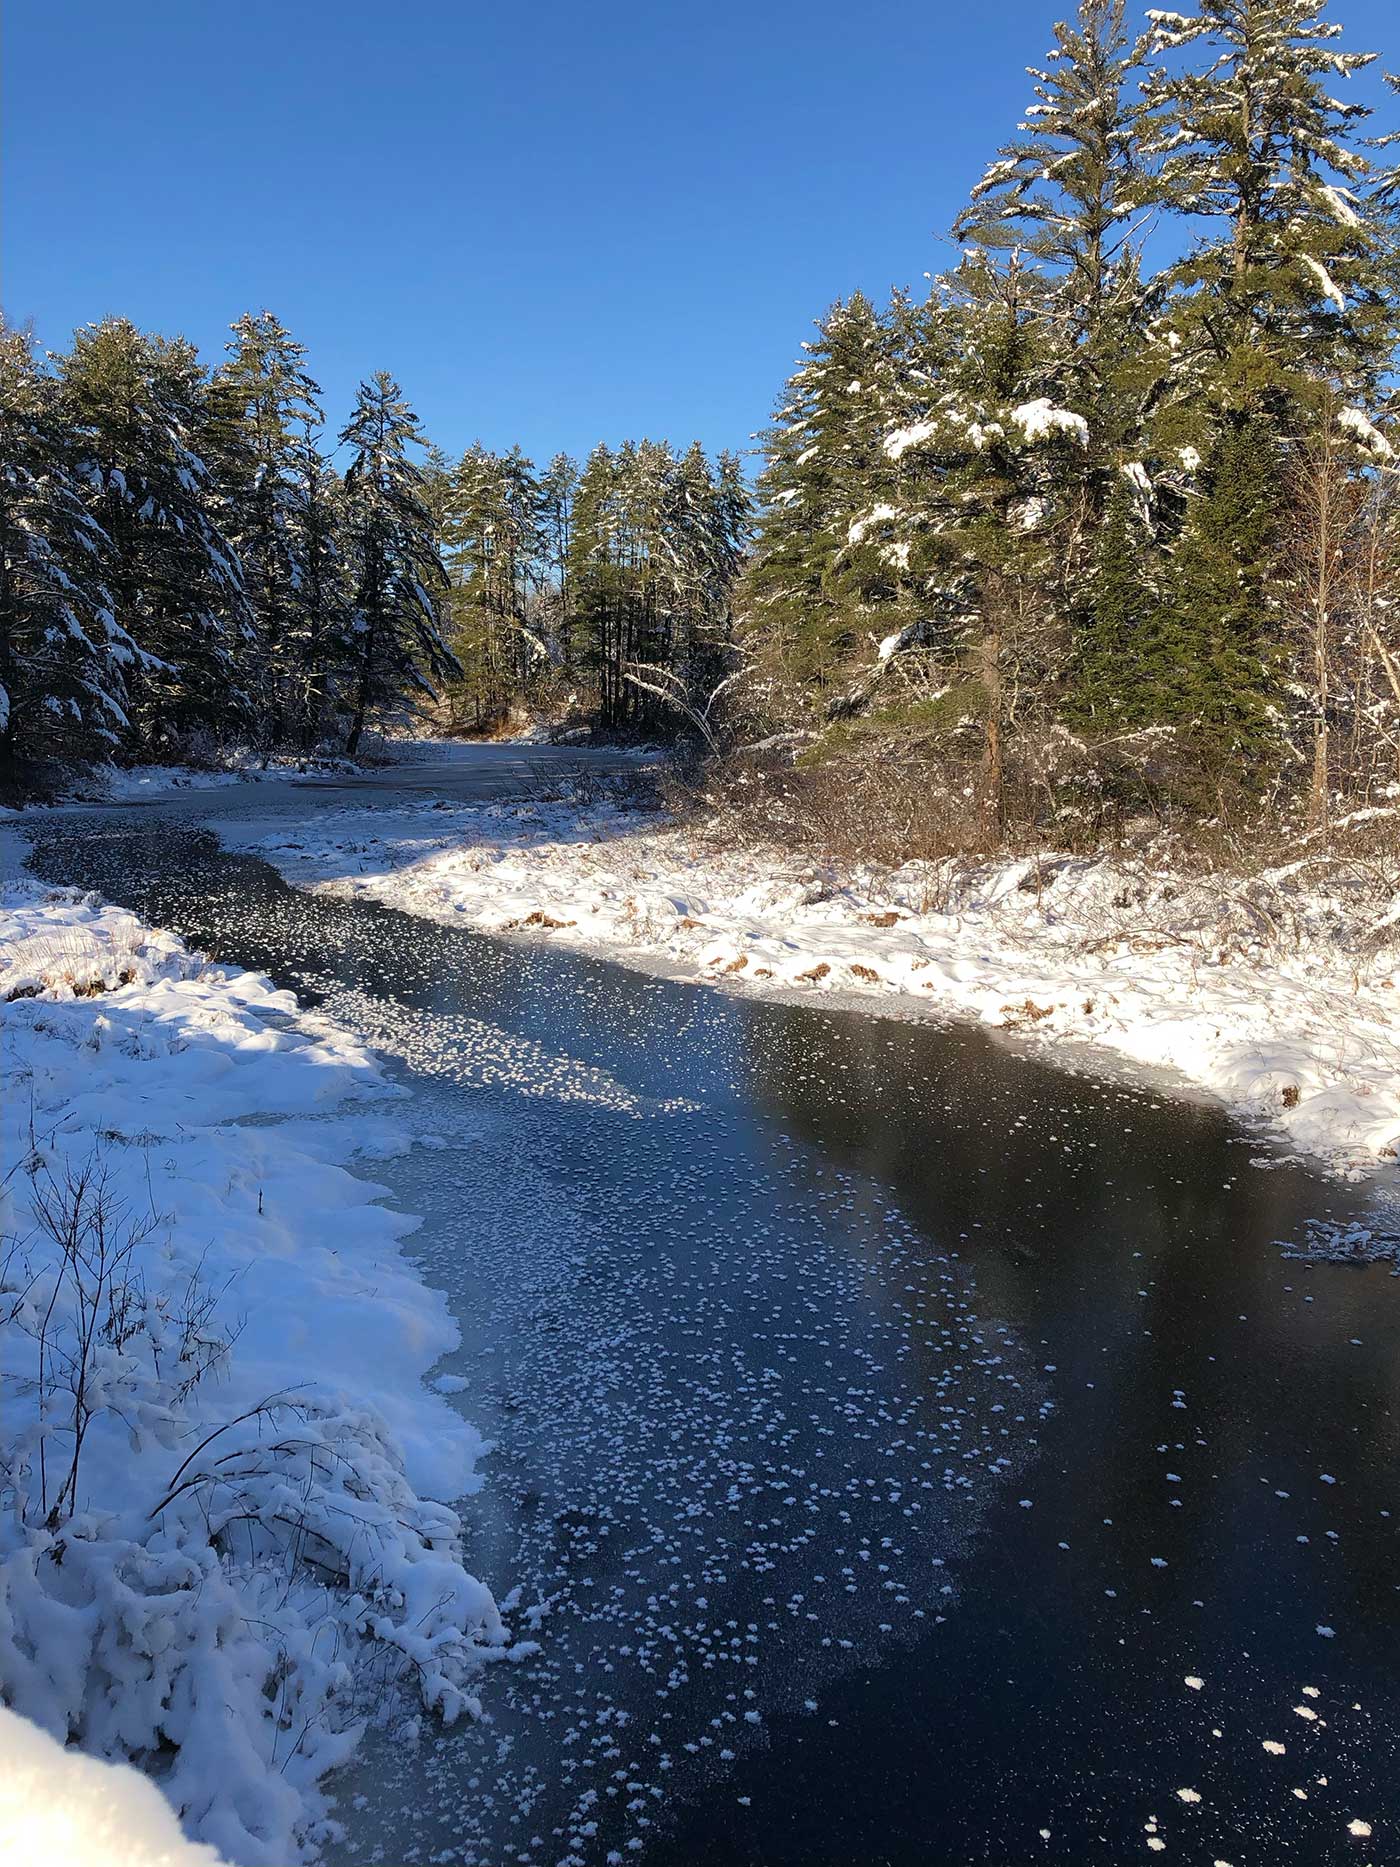 Calm stream of water surrounded by snowy banks and a bright blue sky